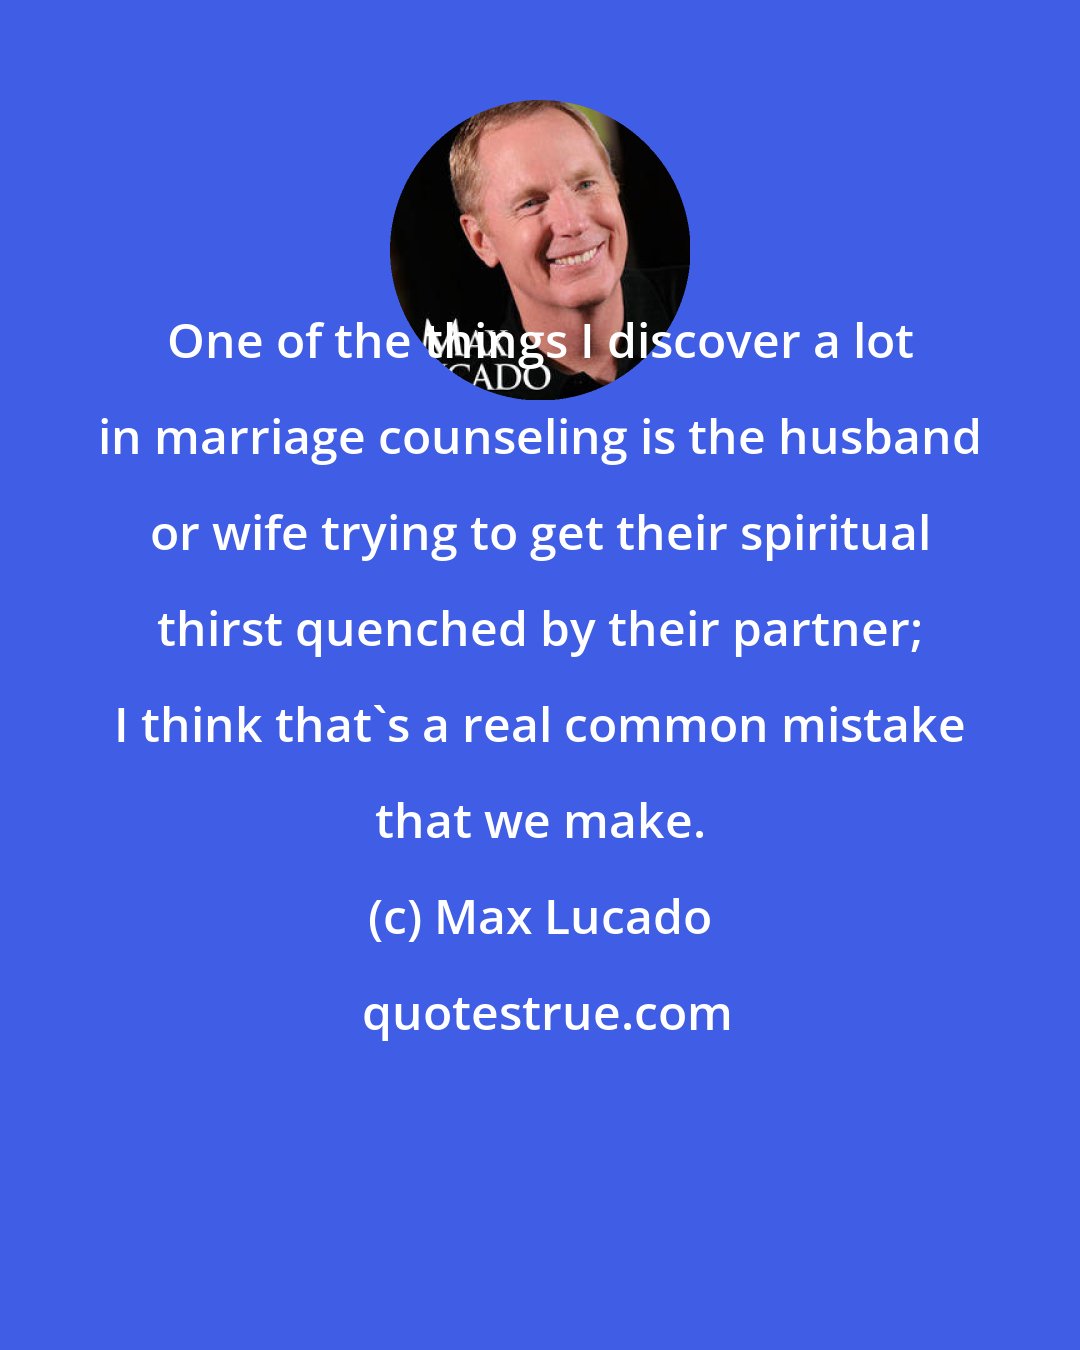 Max Lucado: One of the things I discover a lot in marriage counseling is the husband or wife trying to get their spiritual thirst quenched by their partner; I think that's a real common mistake that we make.